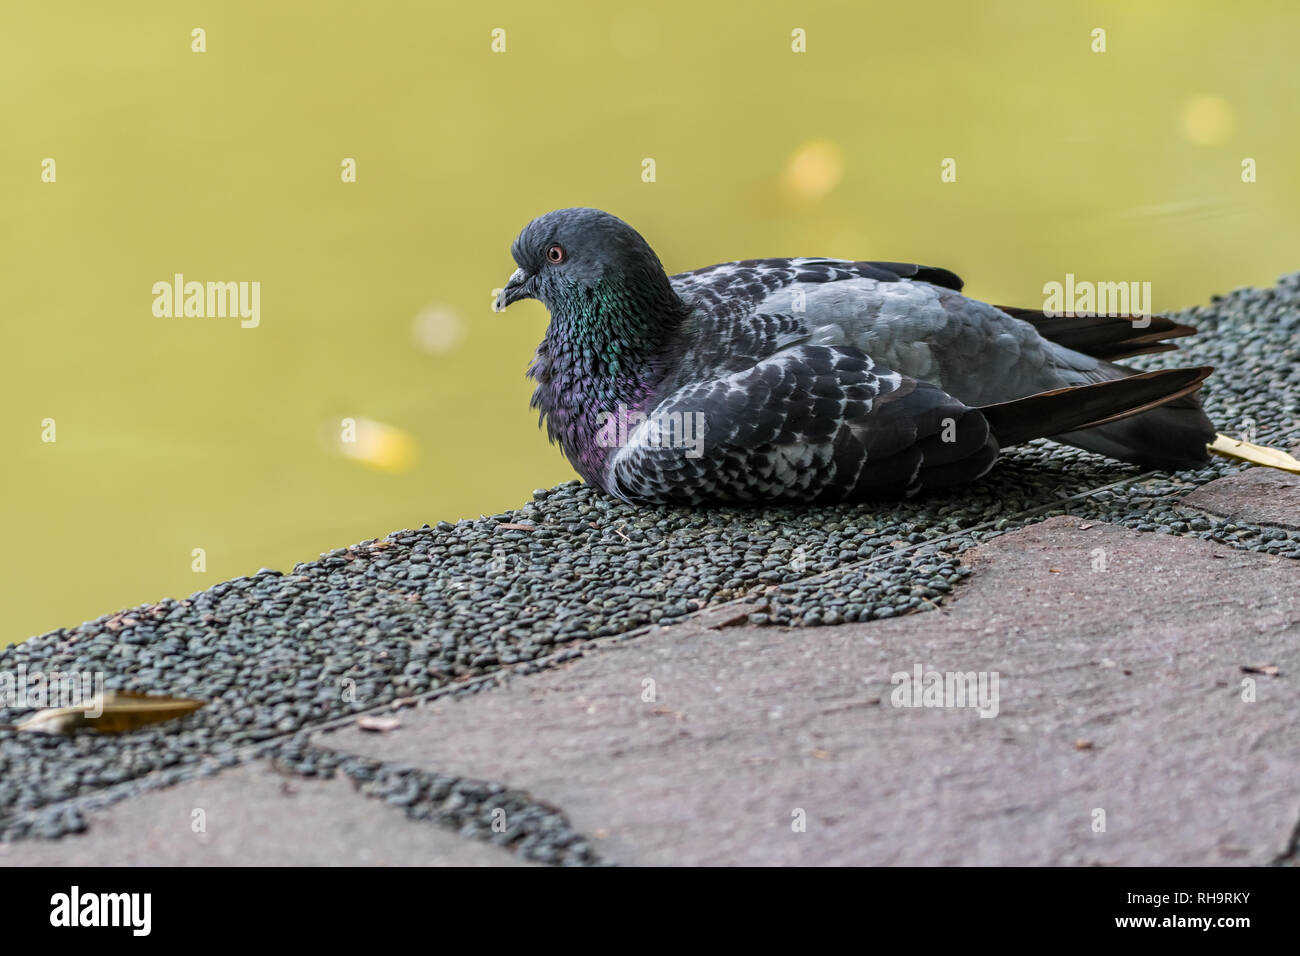 A common pigeon enjoying the day Stock Photo